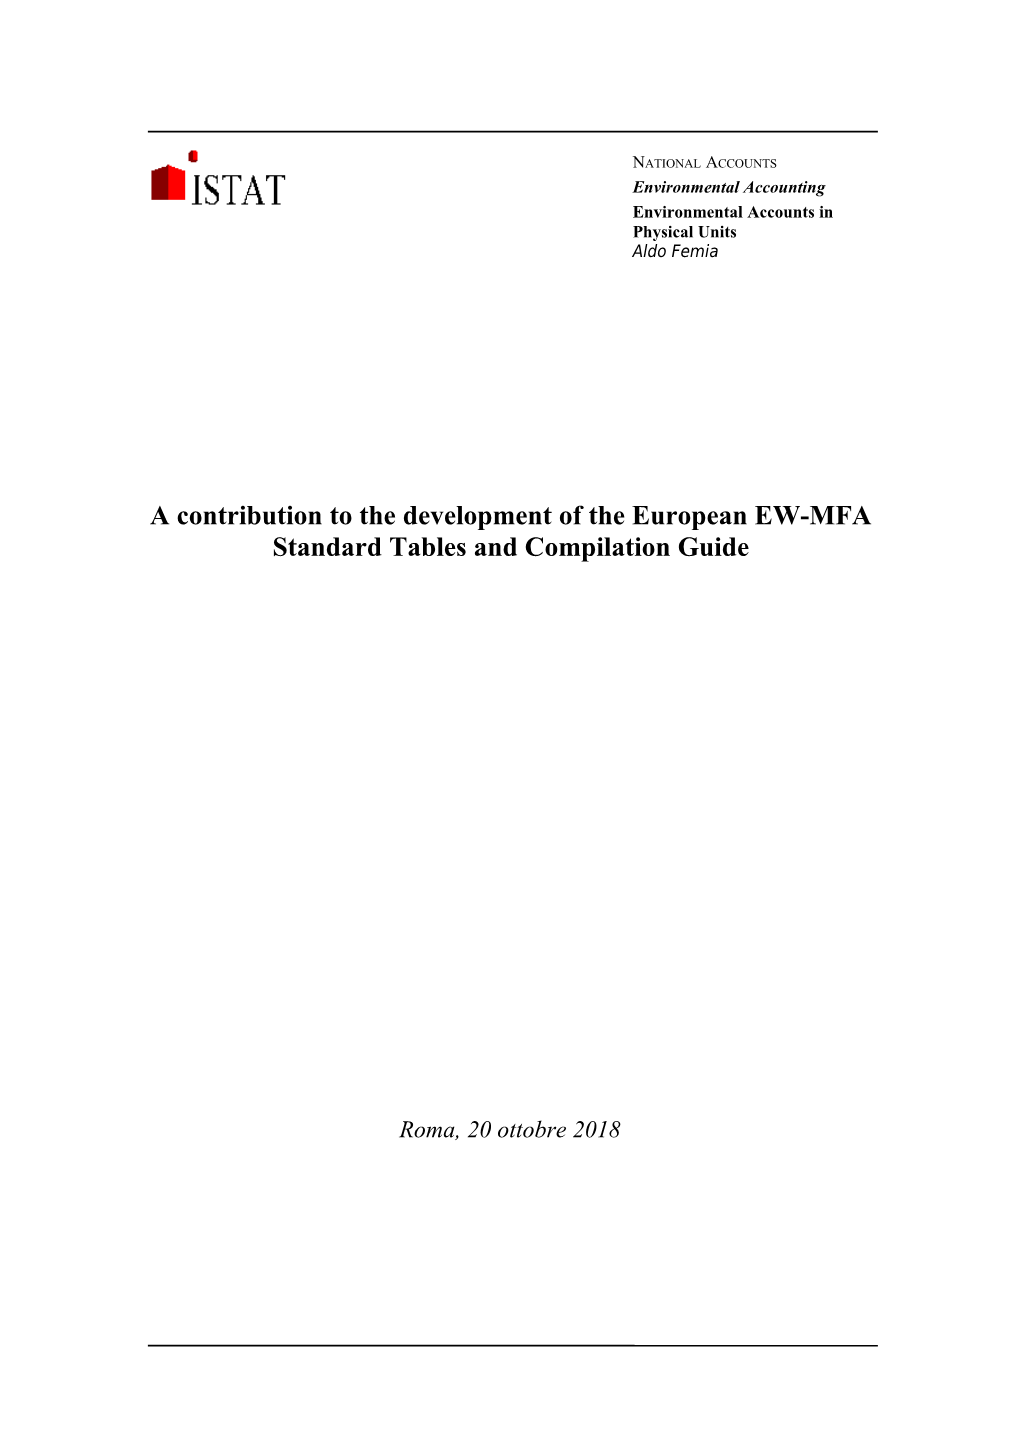 A Contribution to the Development of the European EW-MFA Standard Tables and Compilation Guide